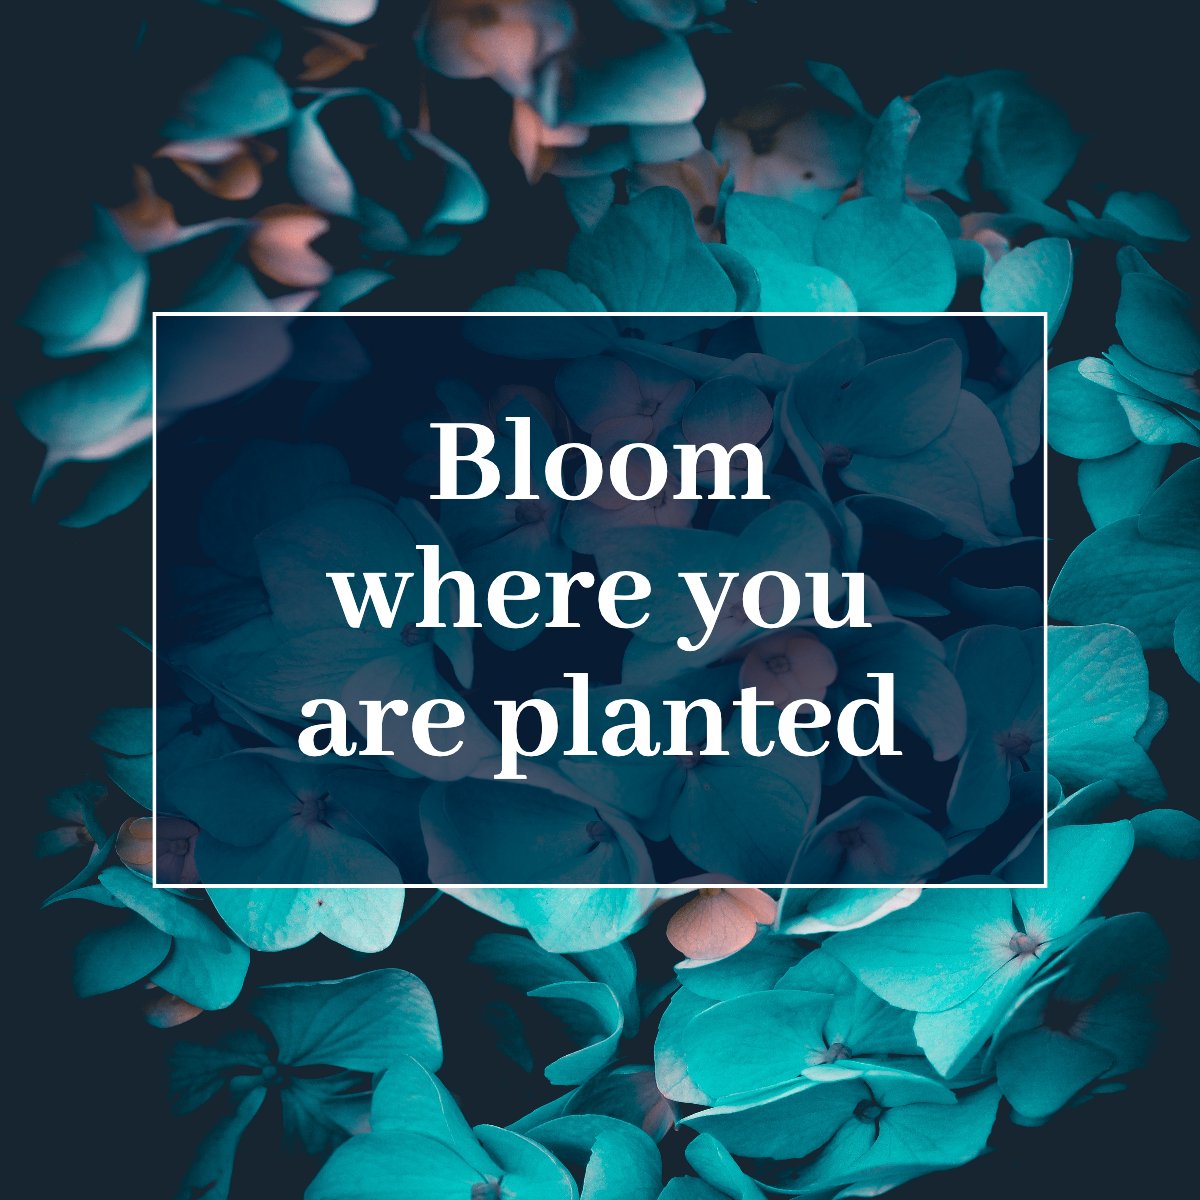 Bloom where you are planted. 🌼

#bloom #lifestyle #liveyourbestlife #lifechanging